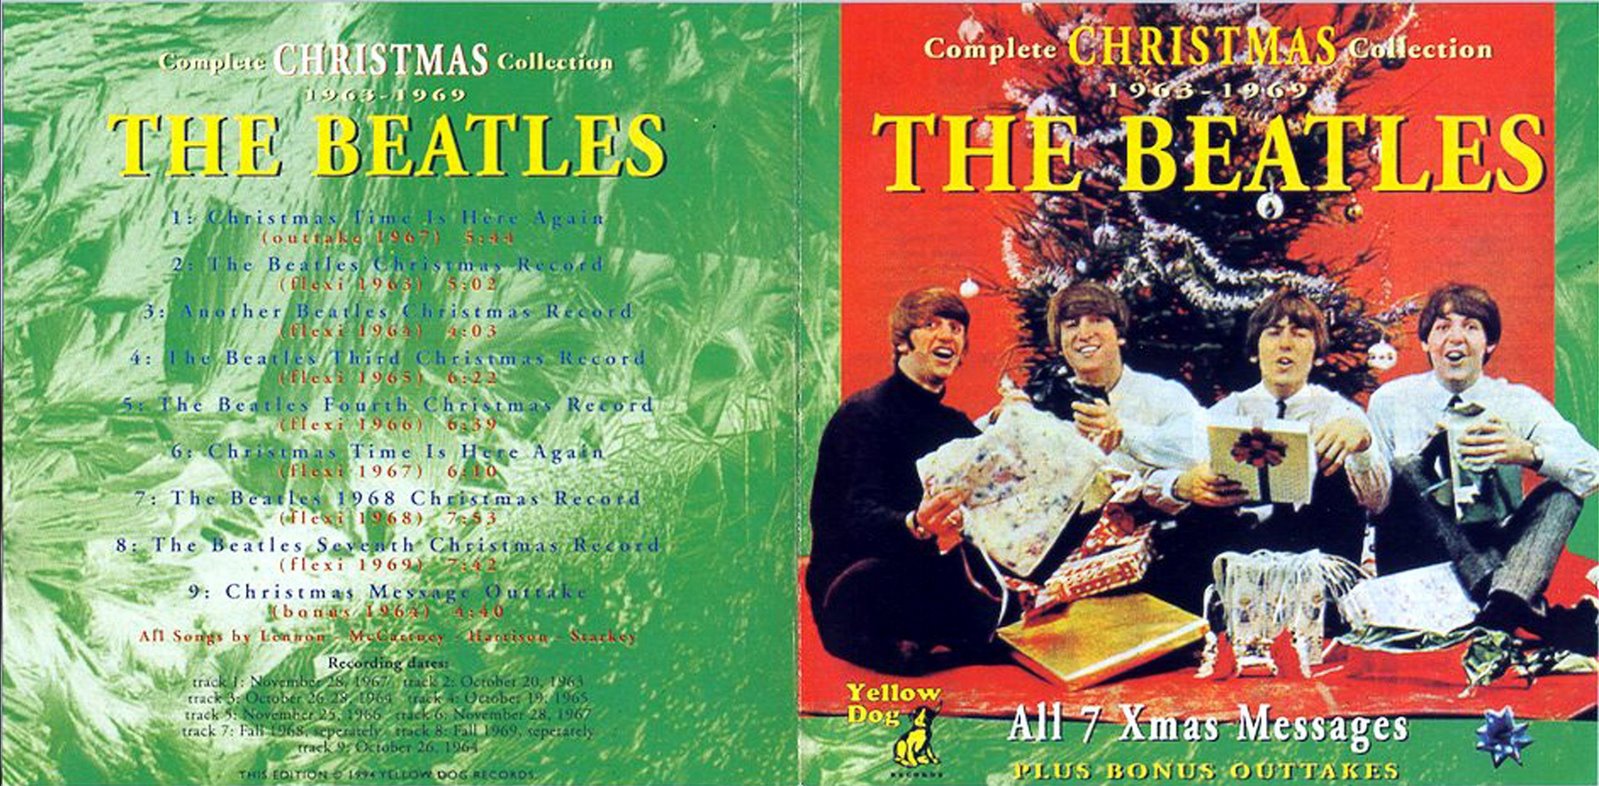 [Beatles_Complete+Christmas+Collection+1963-1969-front.JPG]